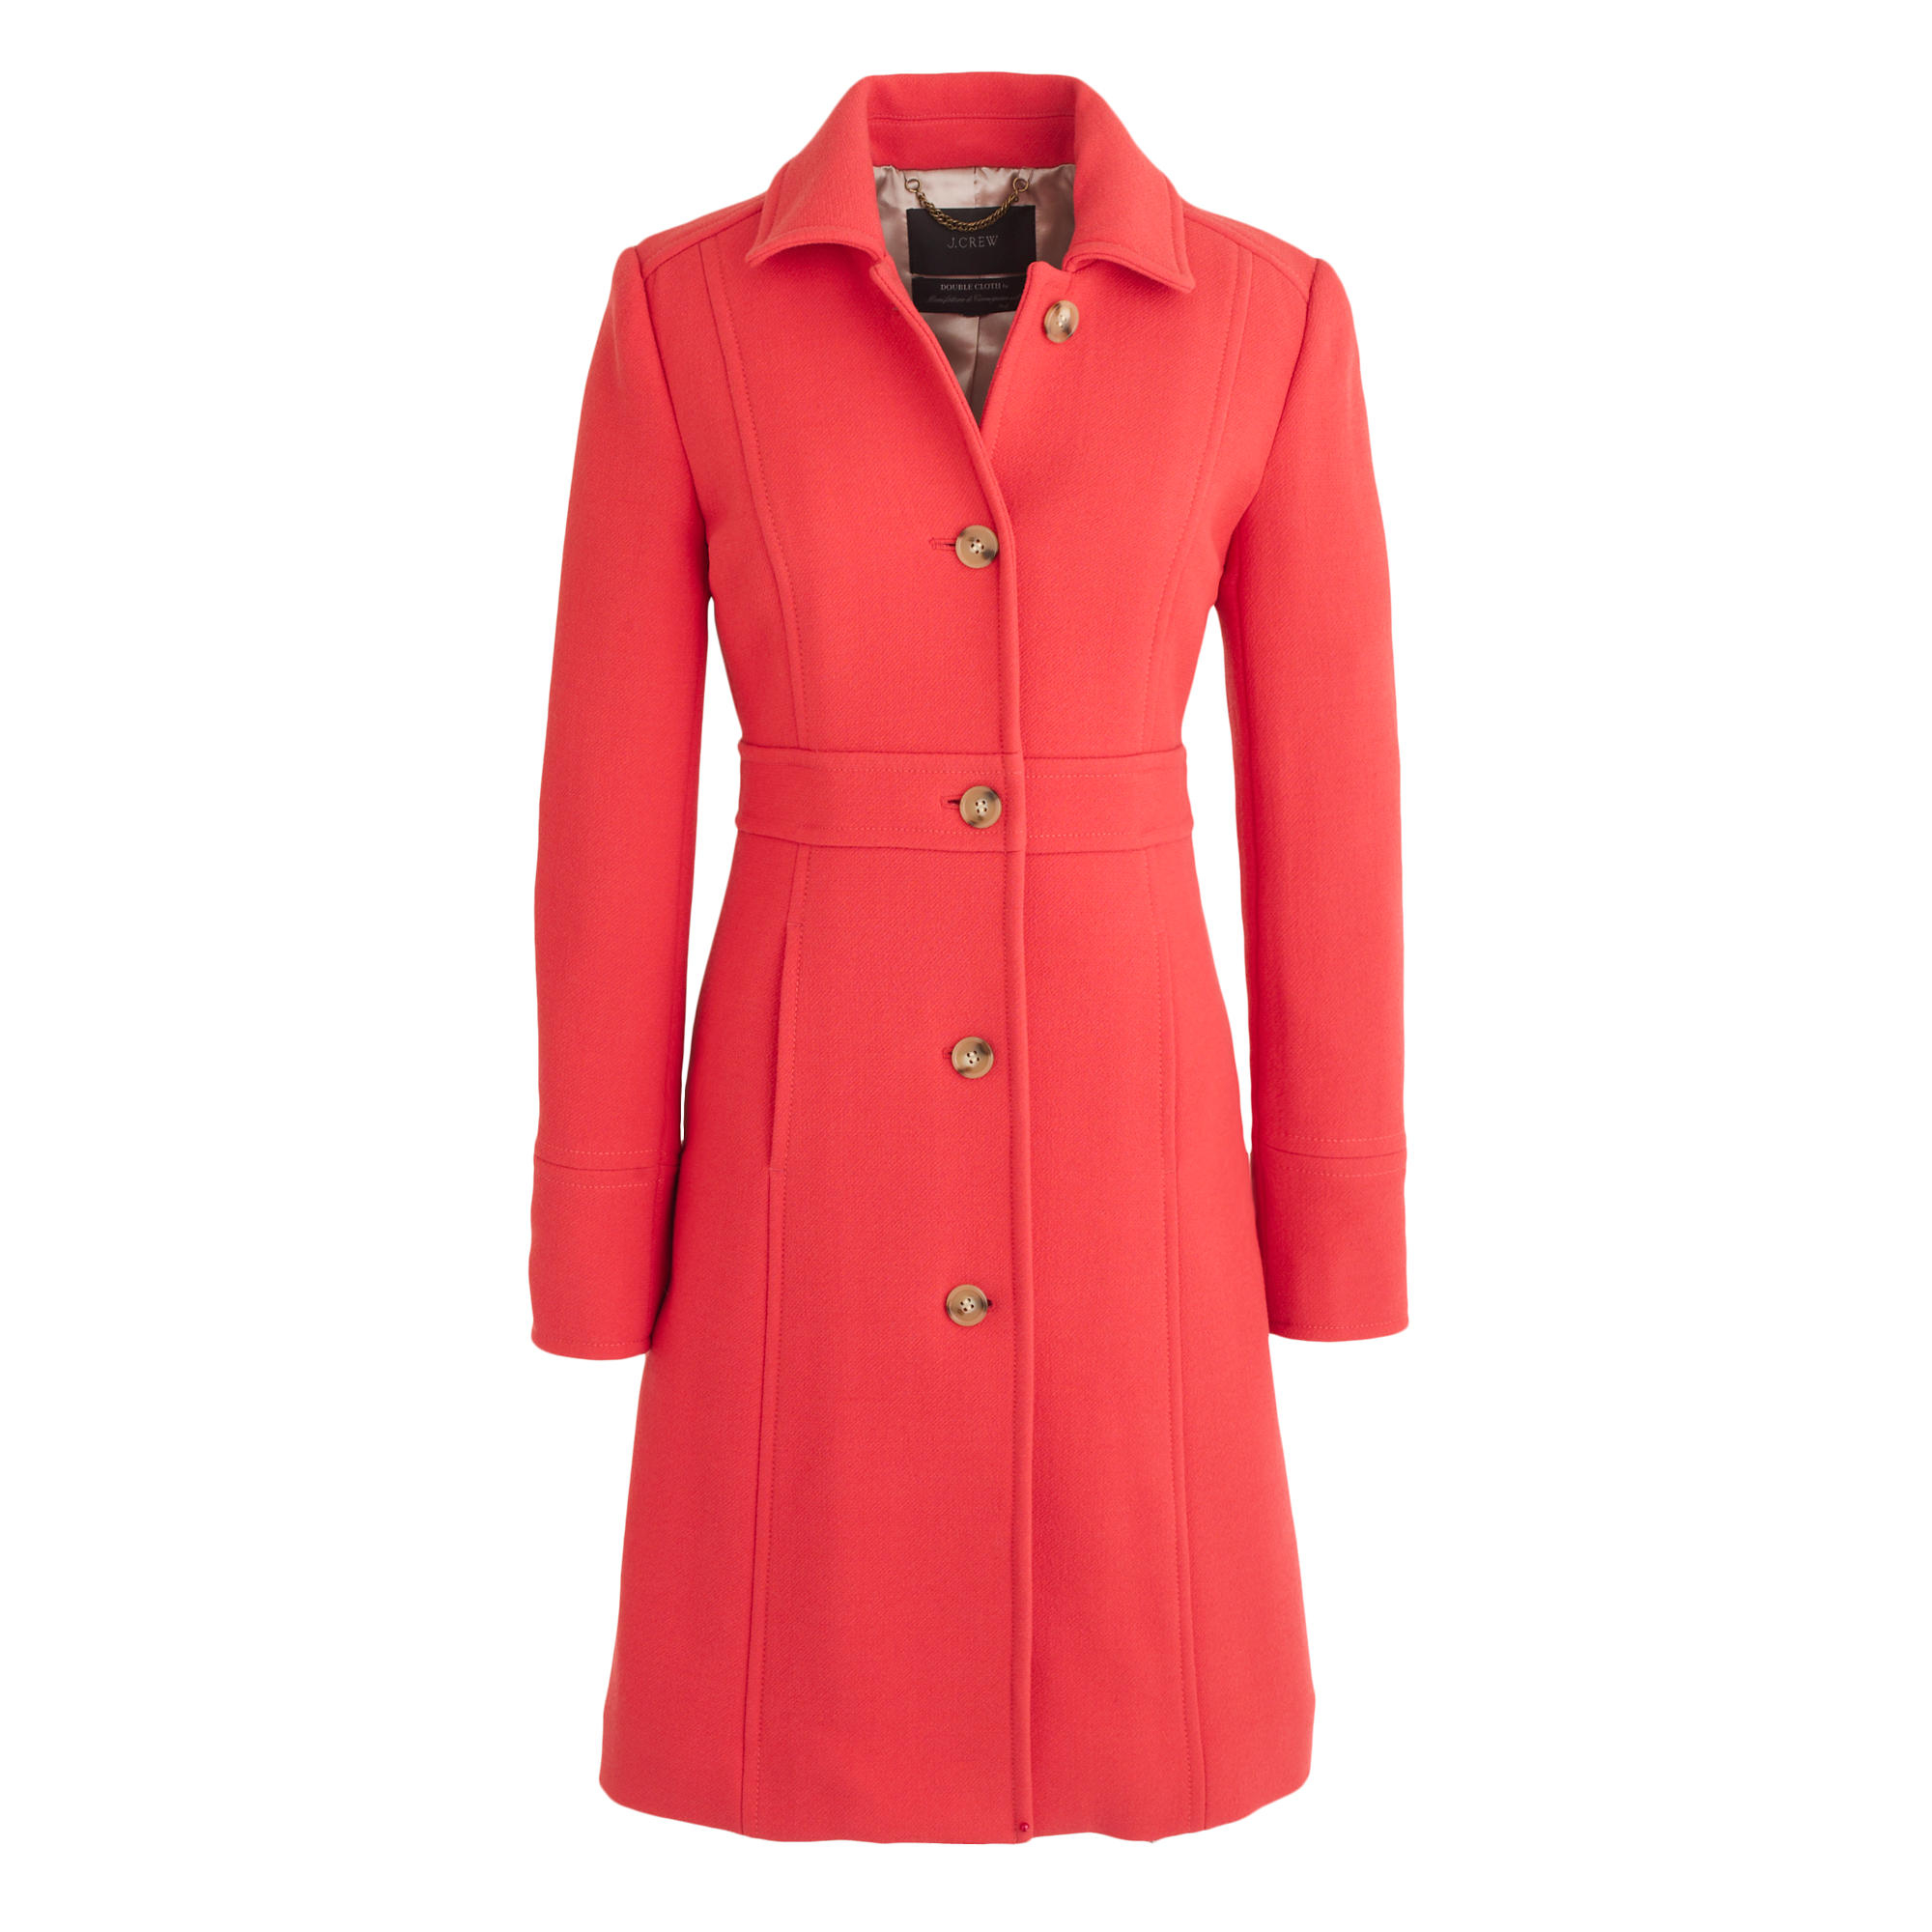 J.Crew Tall Lady Coat Thinsulate in Red Lyst